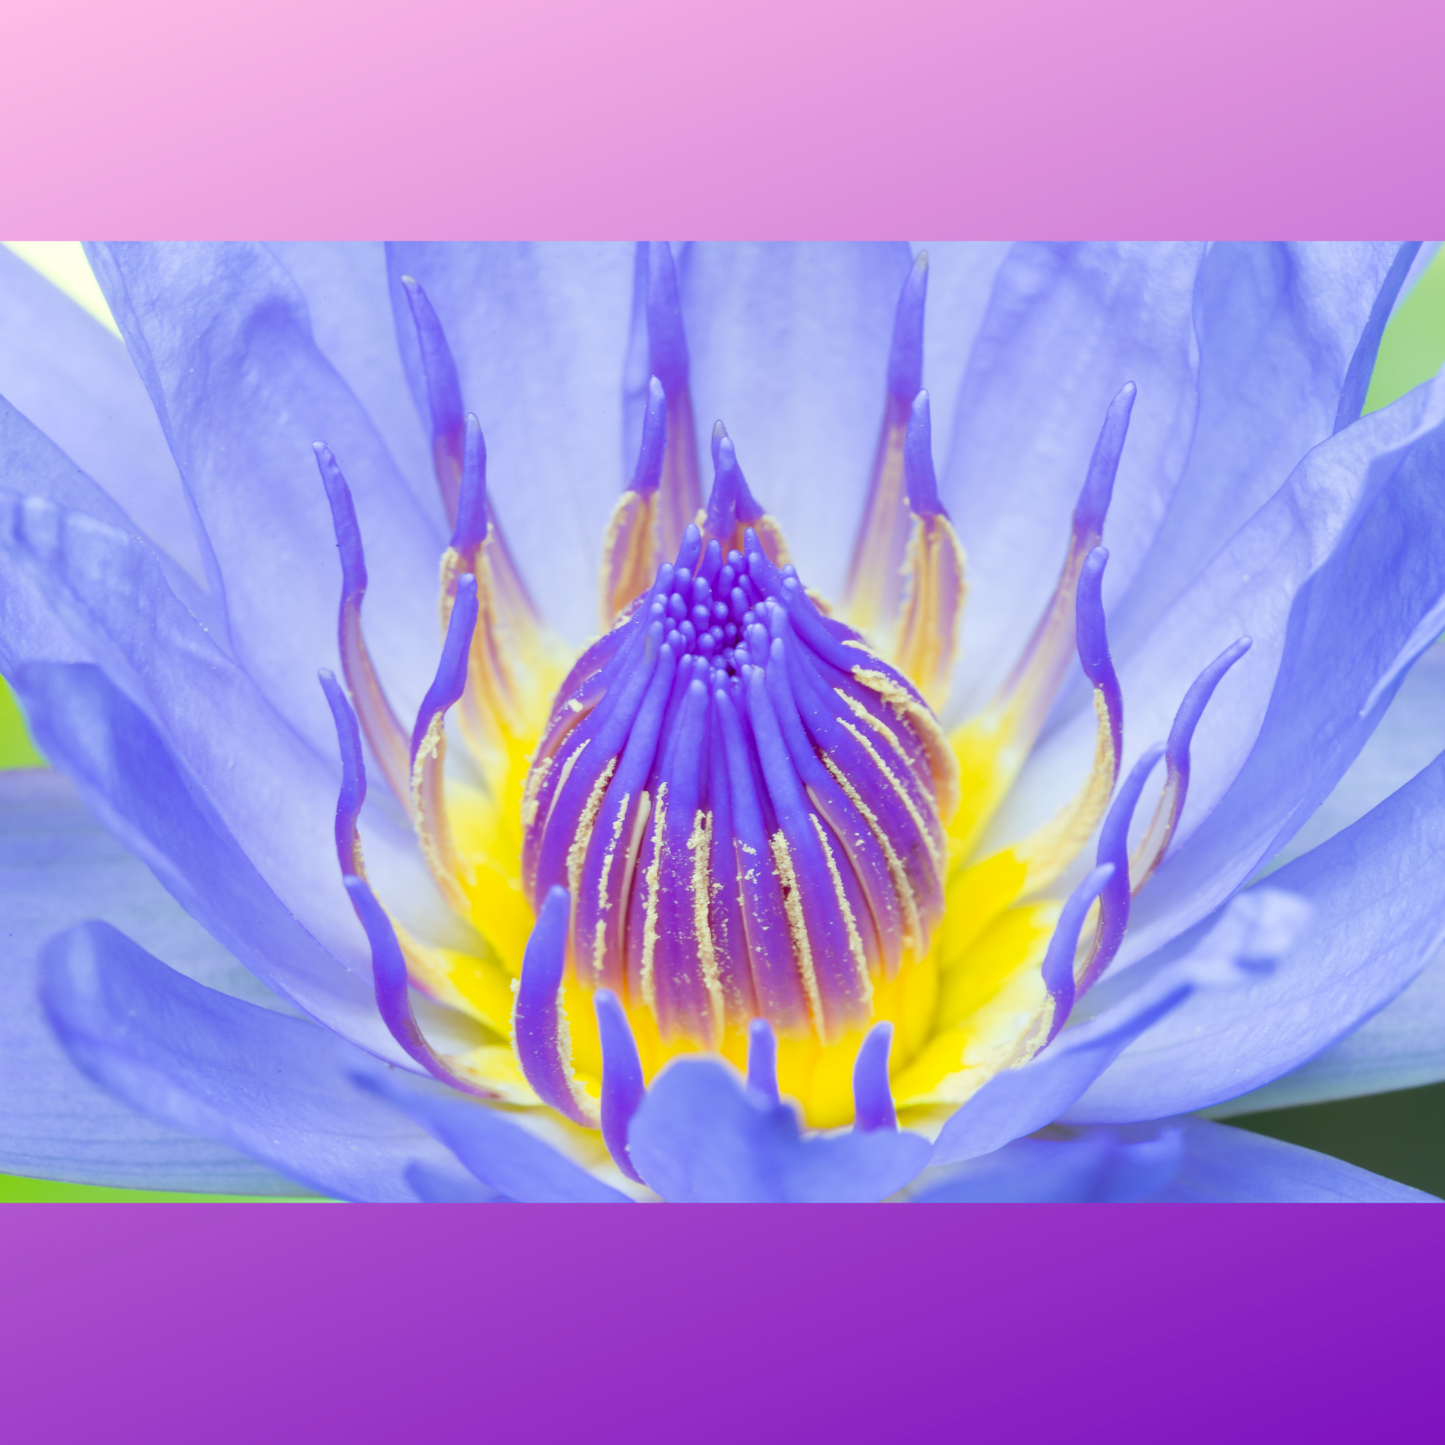 Lotus Flower, Blue, Yellow, Whole Flower Dried